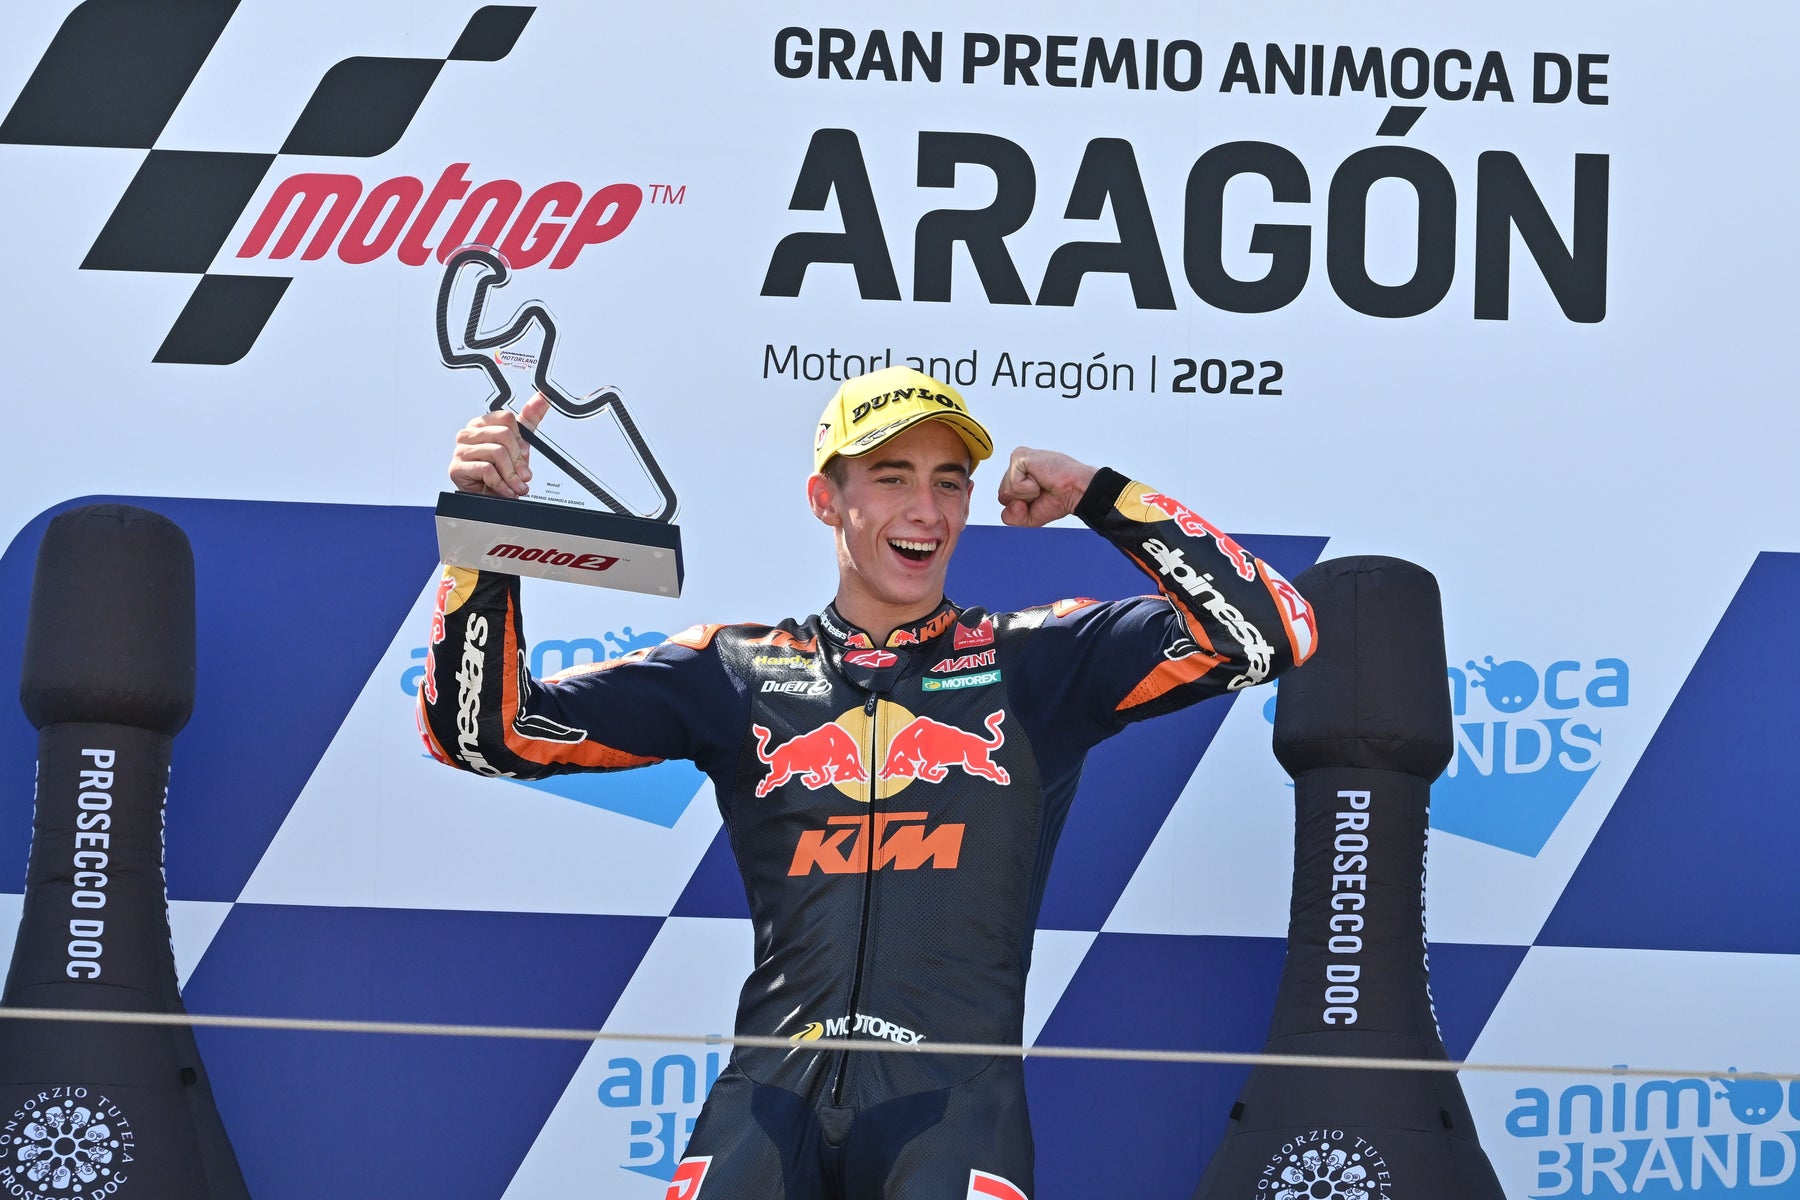 PEDRO ACOSTA SURGES THROUGH PACK TO TAKE ANOTHER ROOKIE SEASON MOTO2 VICTORY IN ARAGON